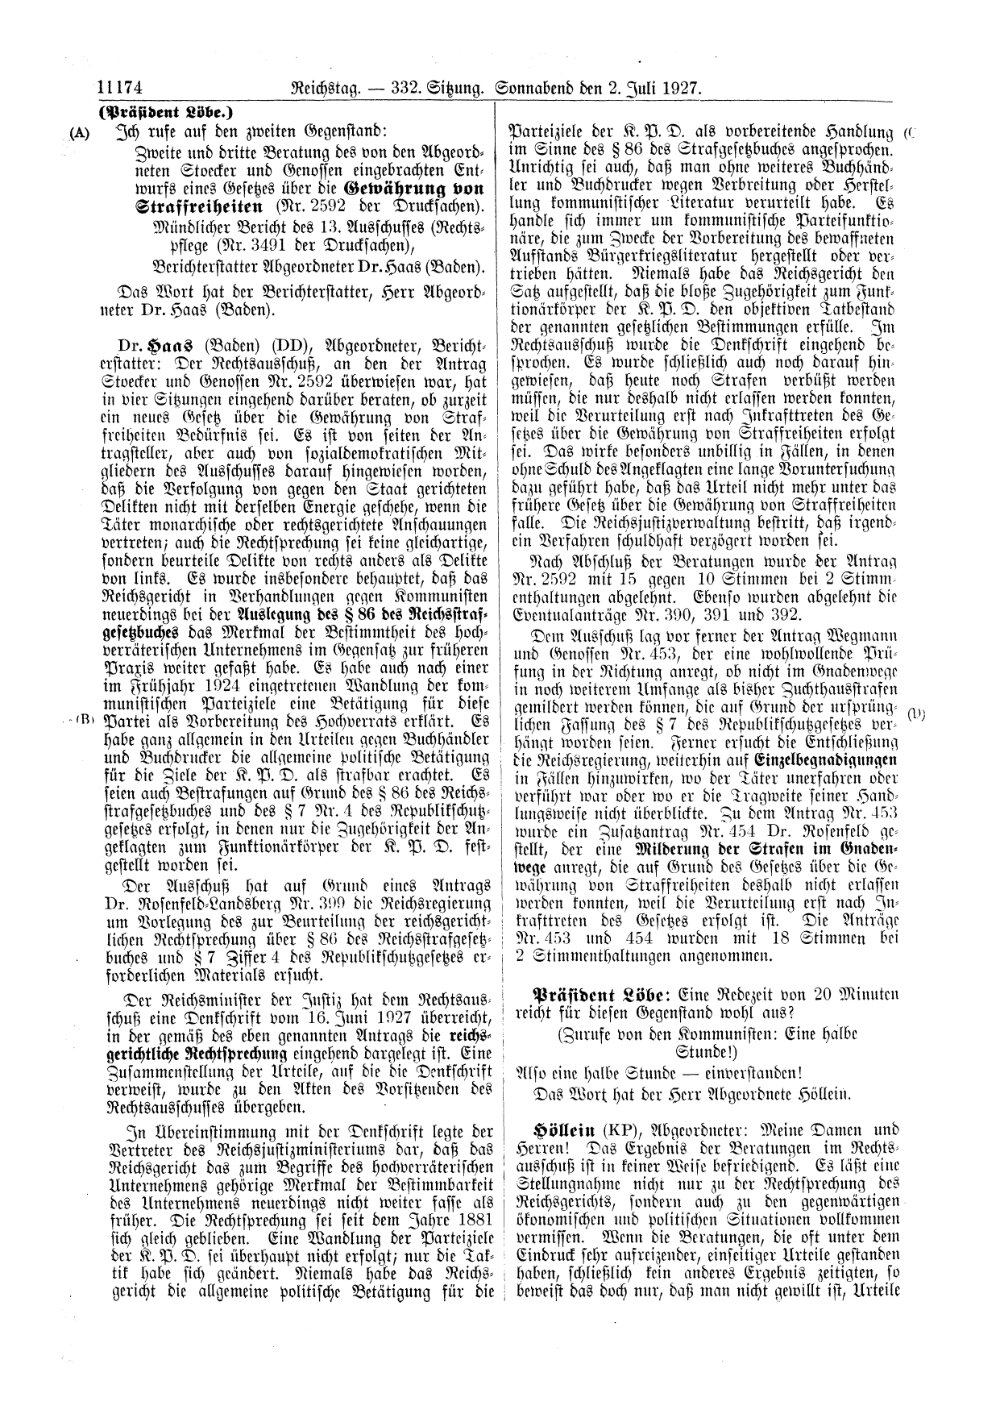 Scan of page 11174